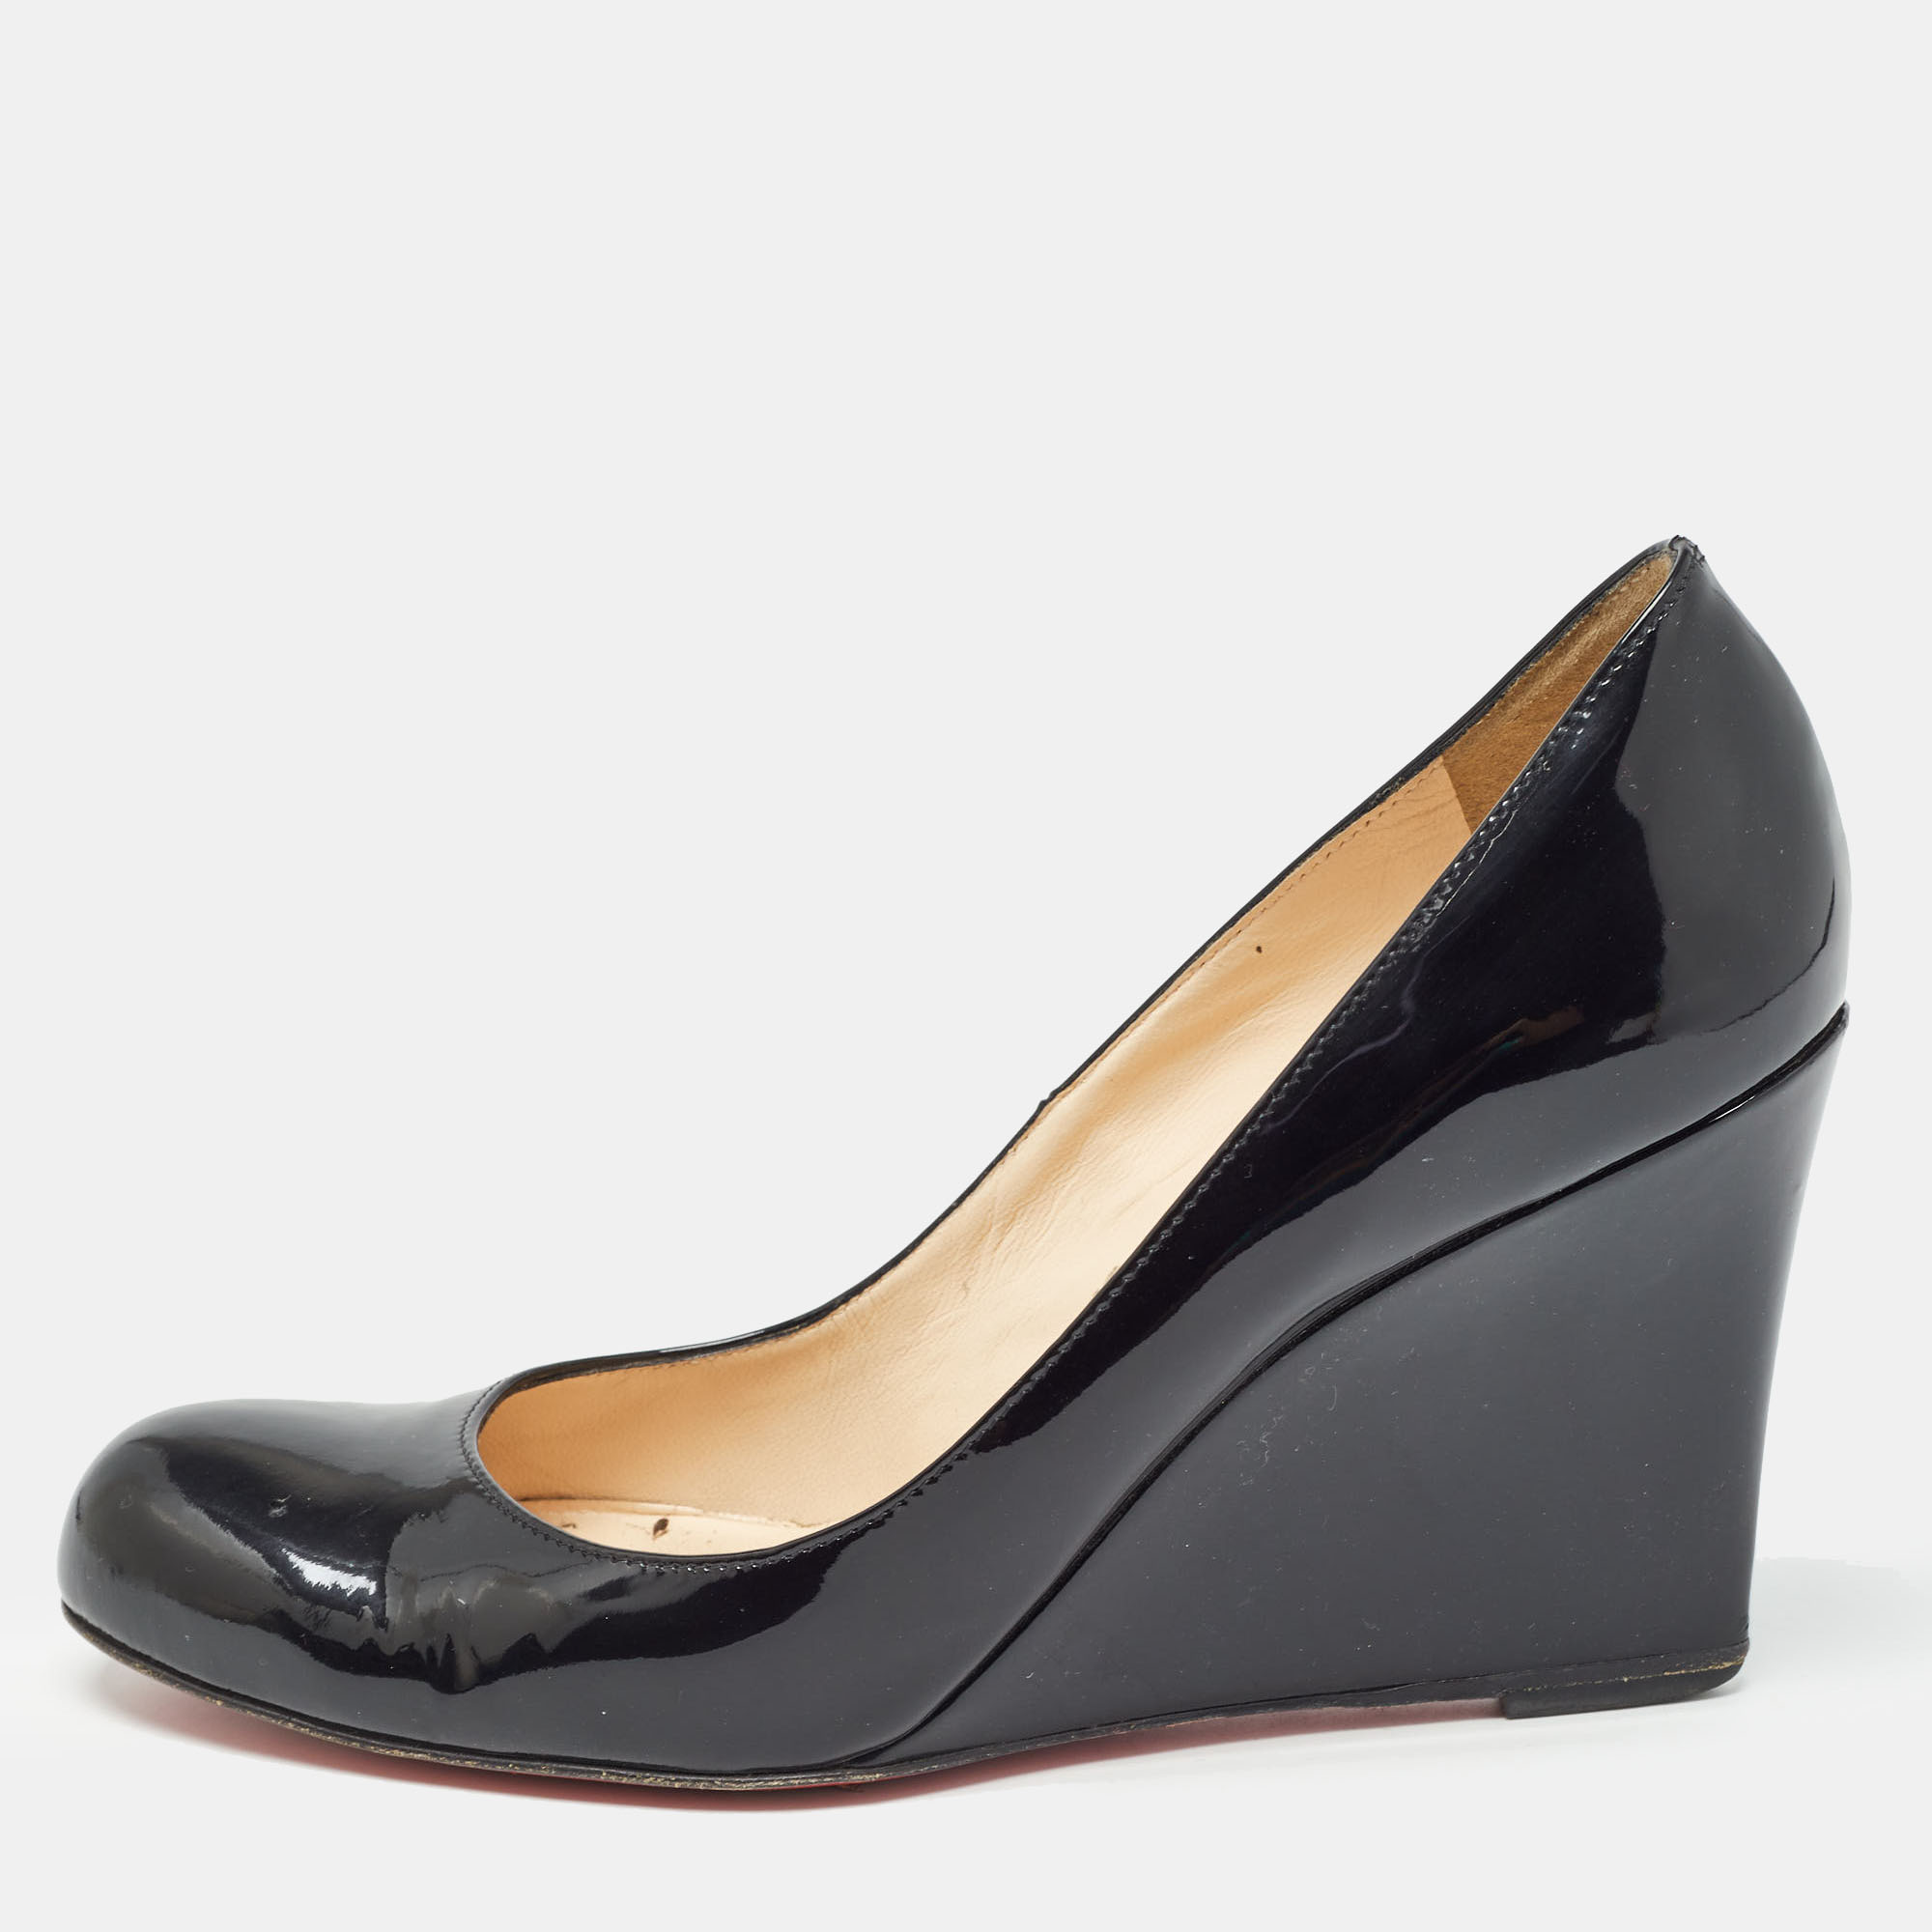 Christian louboutin black patent leather ron ron wedge pumps size 38.5